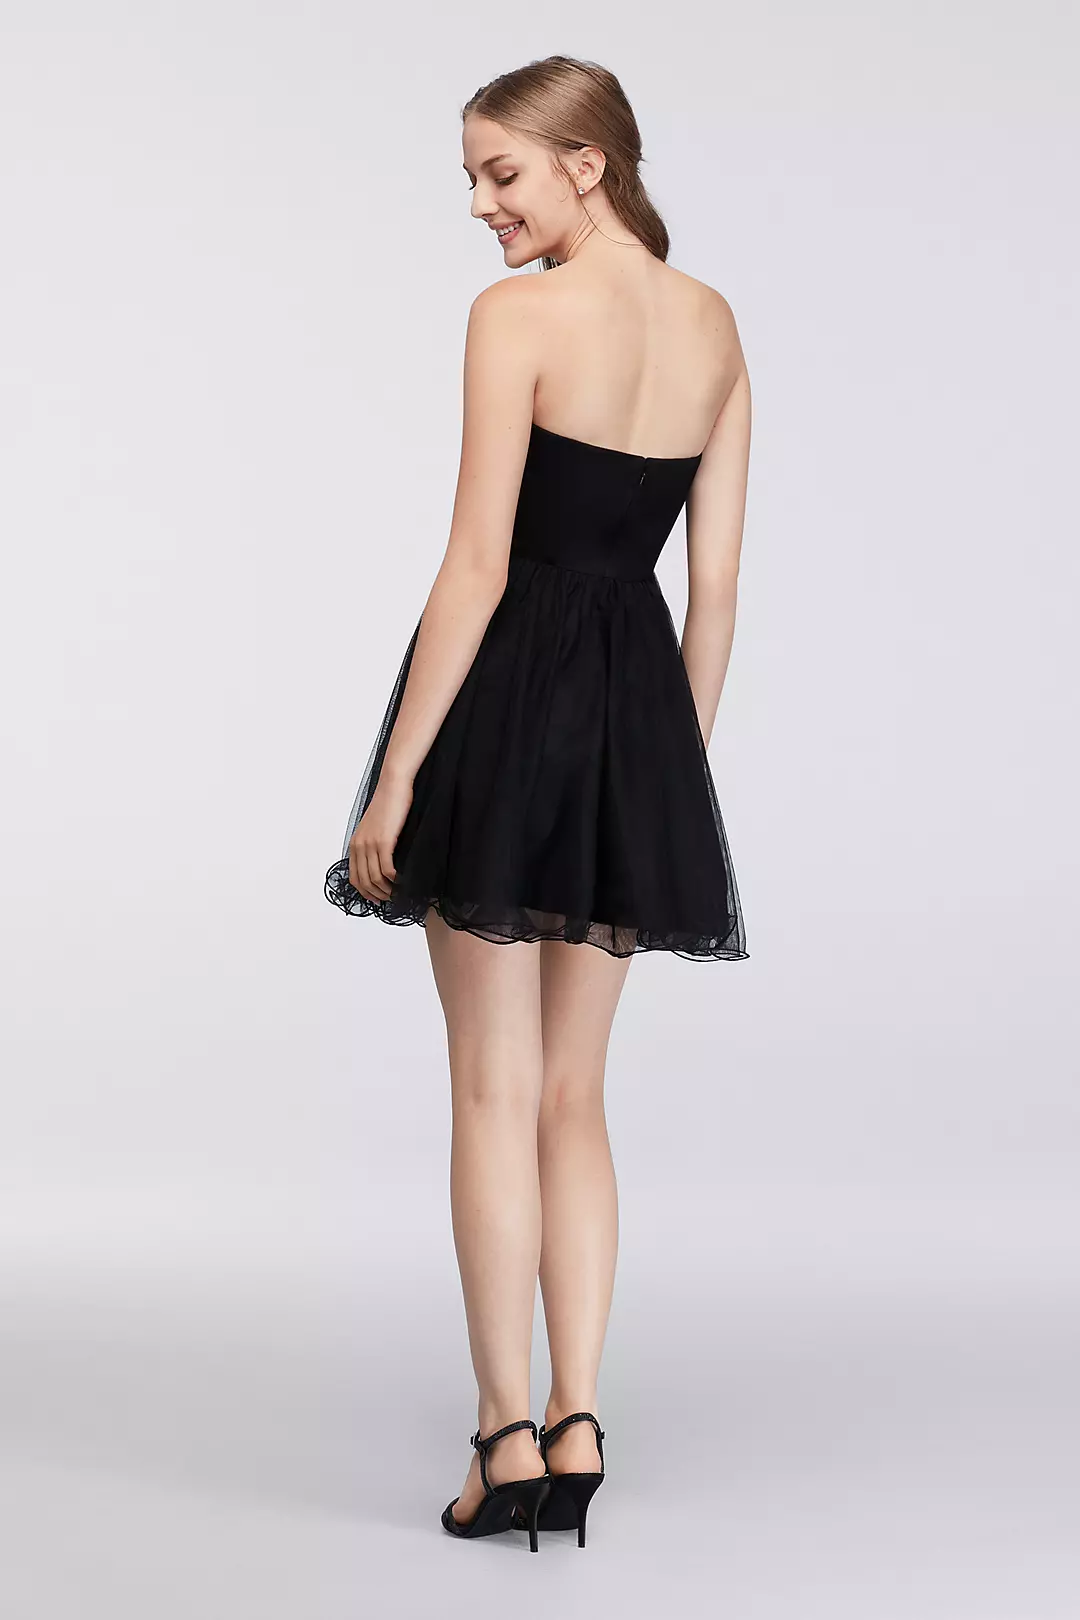 Short Strapless Homecoming Dress with Beading Image 2